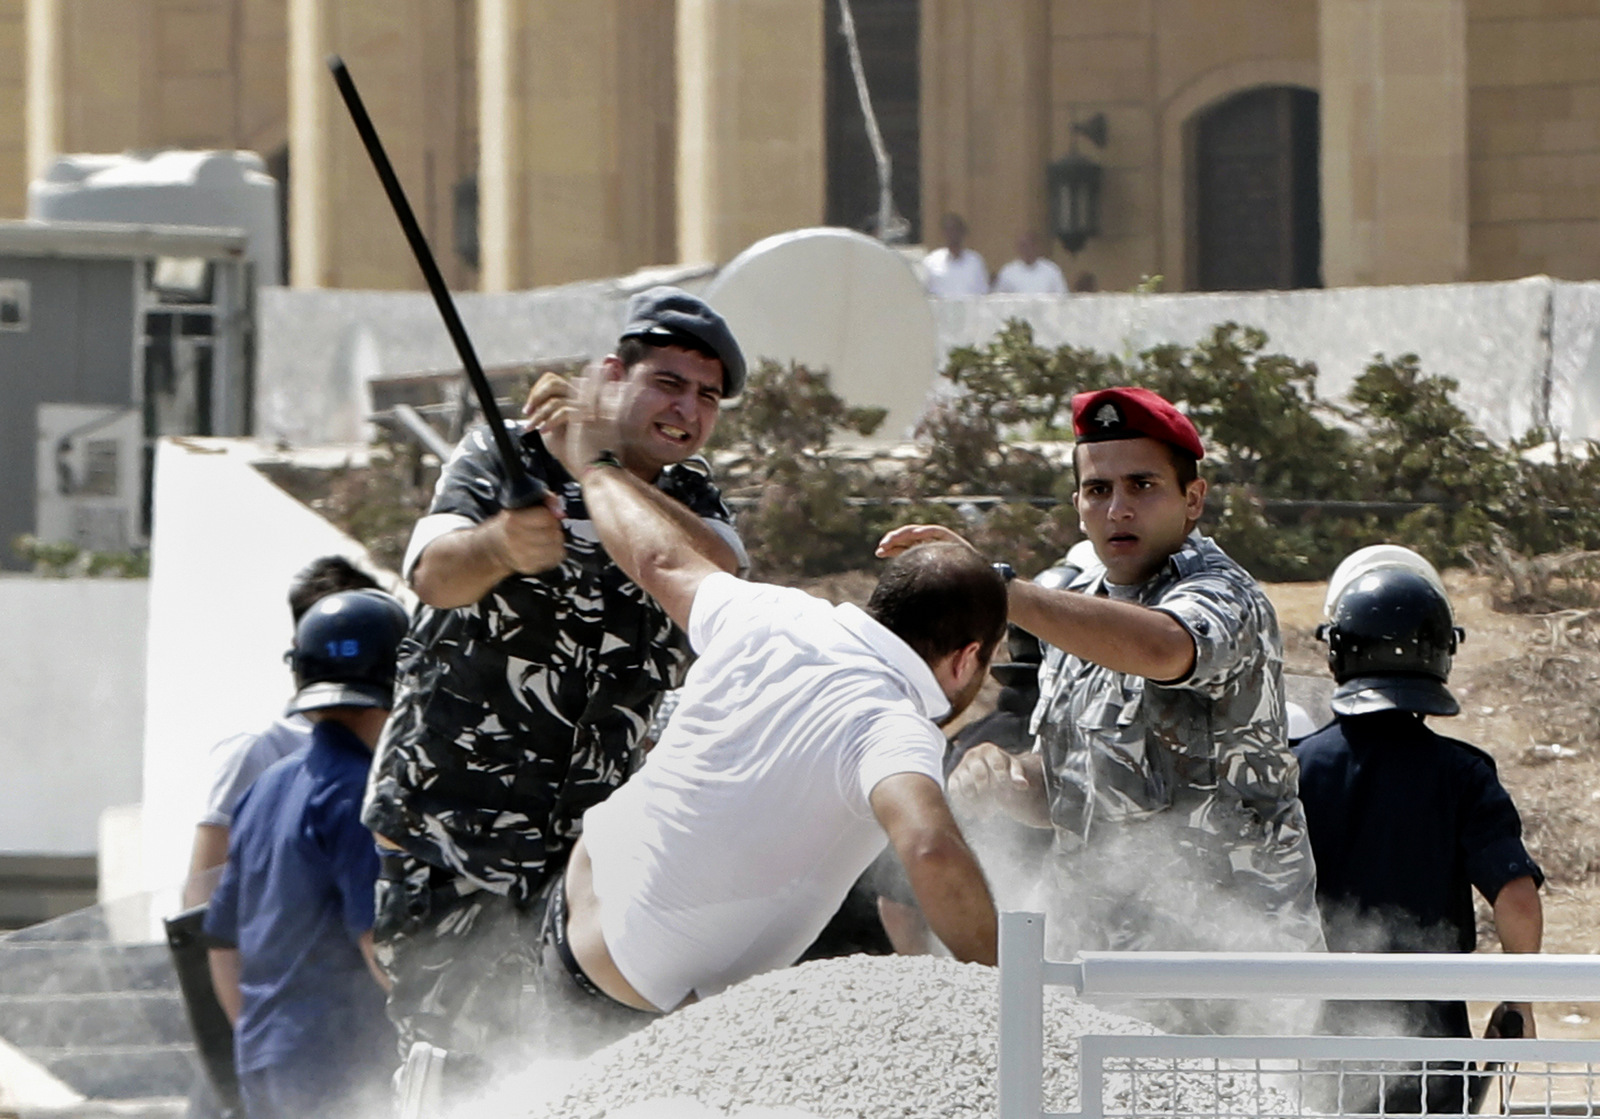 Lebanese riot policemen strike an anti-government protester during clashes on a road leading to the parliament building, in downtown Beirut, Lebanon, Wednesday, Sept. 16, 2015. Lebanese police beat back protesters in downtown Beirut Wednesday ahead of the second session of dialogue between senior politicians, amid widespread anger over the government’s failure to deal with the country’s trash crisis and other political problems. (AP Photo/Bilal Hussein)